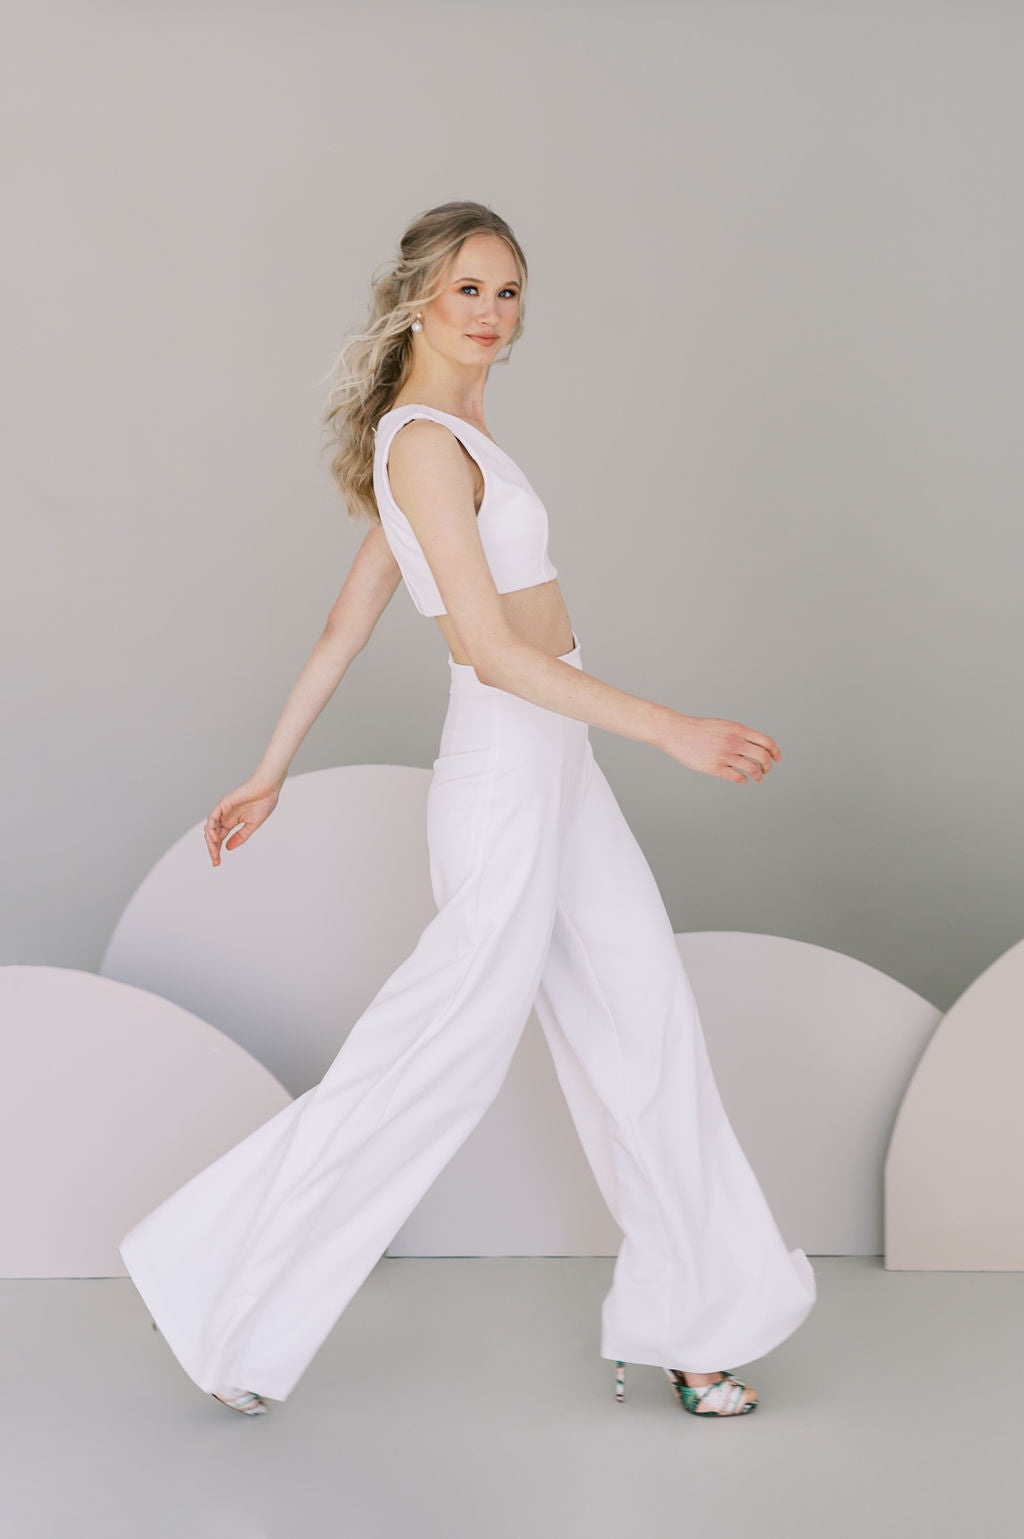 Modern wedding pants for an informal bridal outfit. Stretch crepe palazzo trousers with a tapered fit at the waist. Designed by Catherine Langlois, Canada.